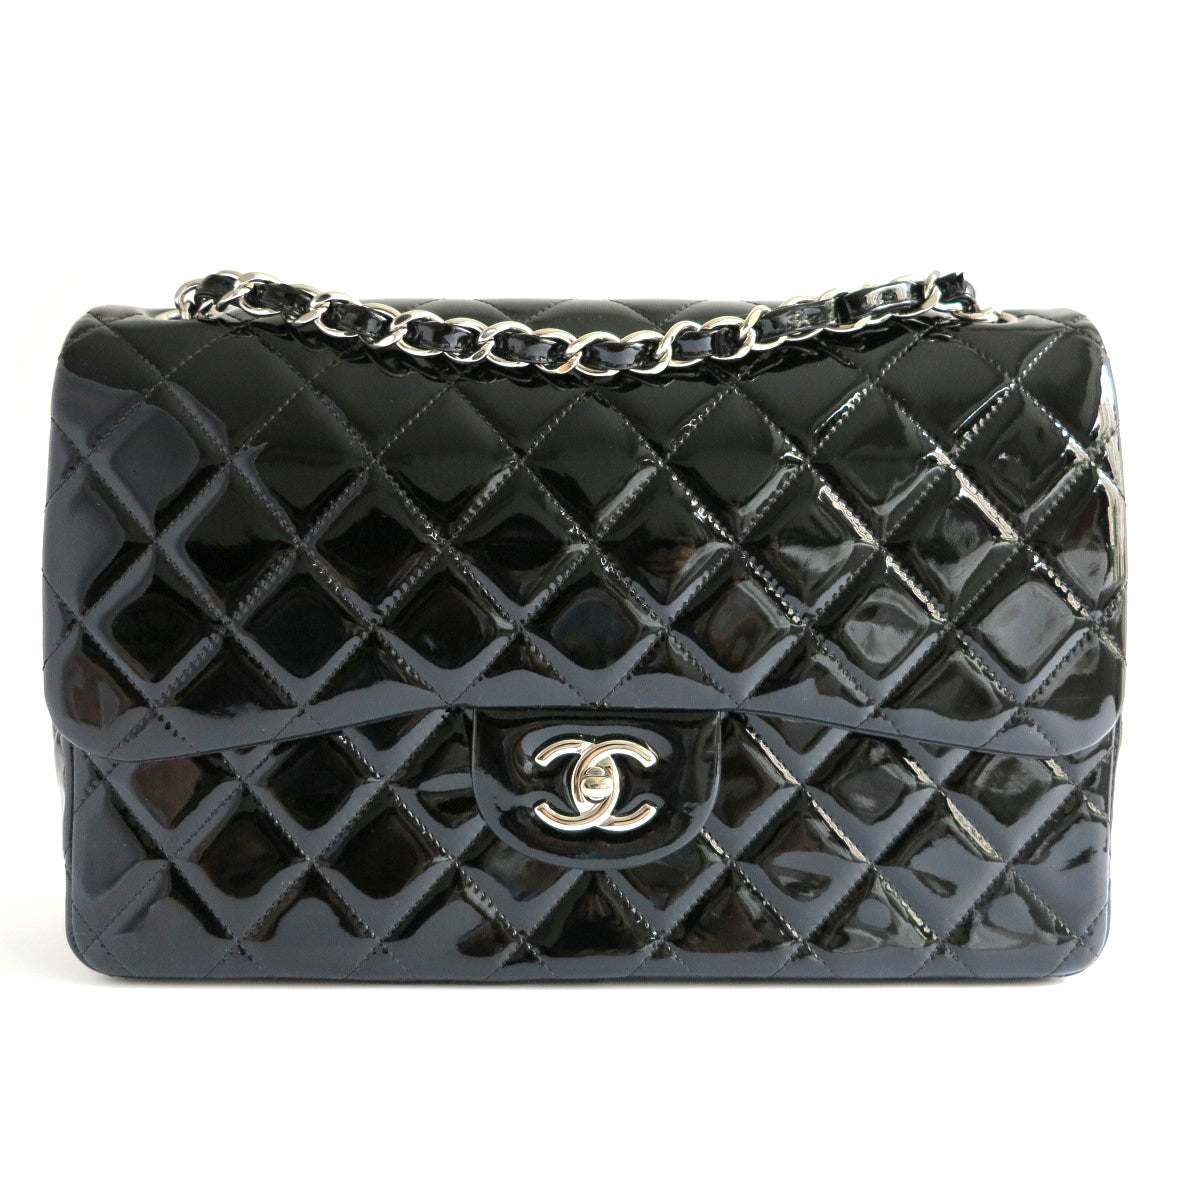 CHANEL Jumbo Classic Double Flap Bag in Black Patent Leather